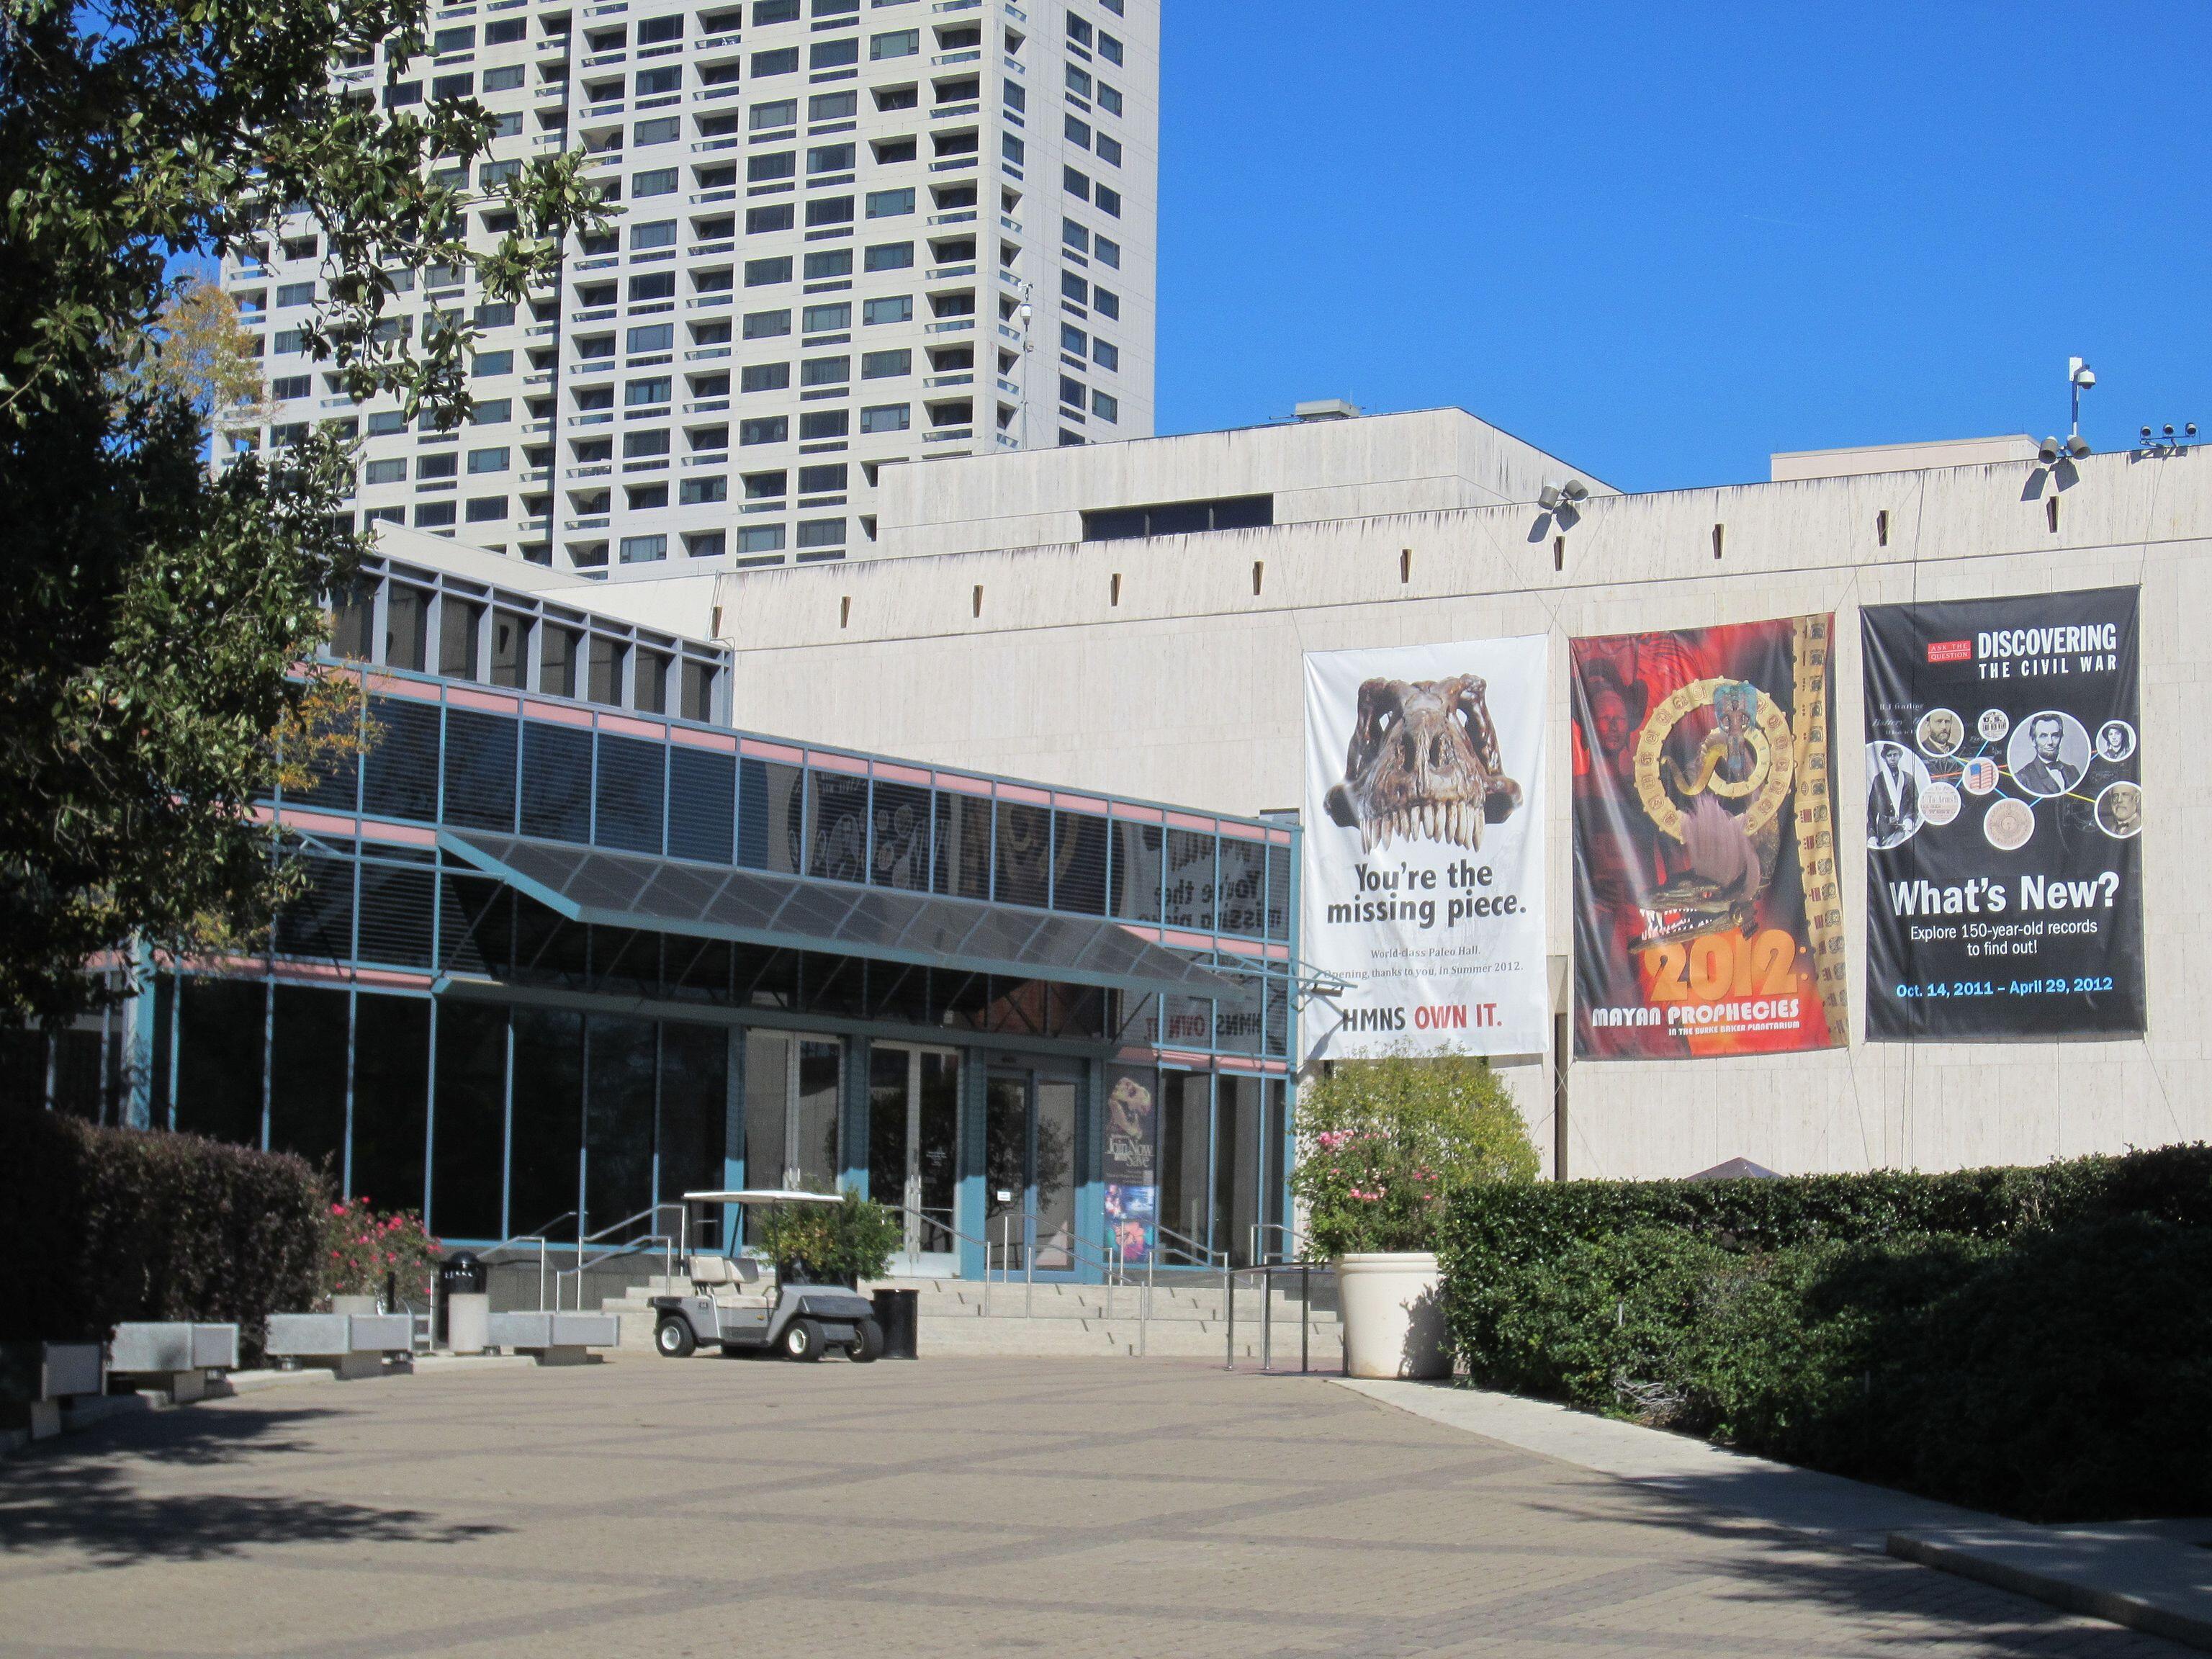 Entrance to the Houston Museum of Natural Science in Houston, Texas in January 2012